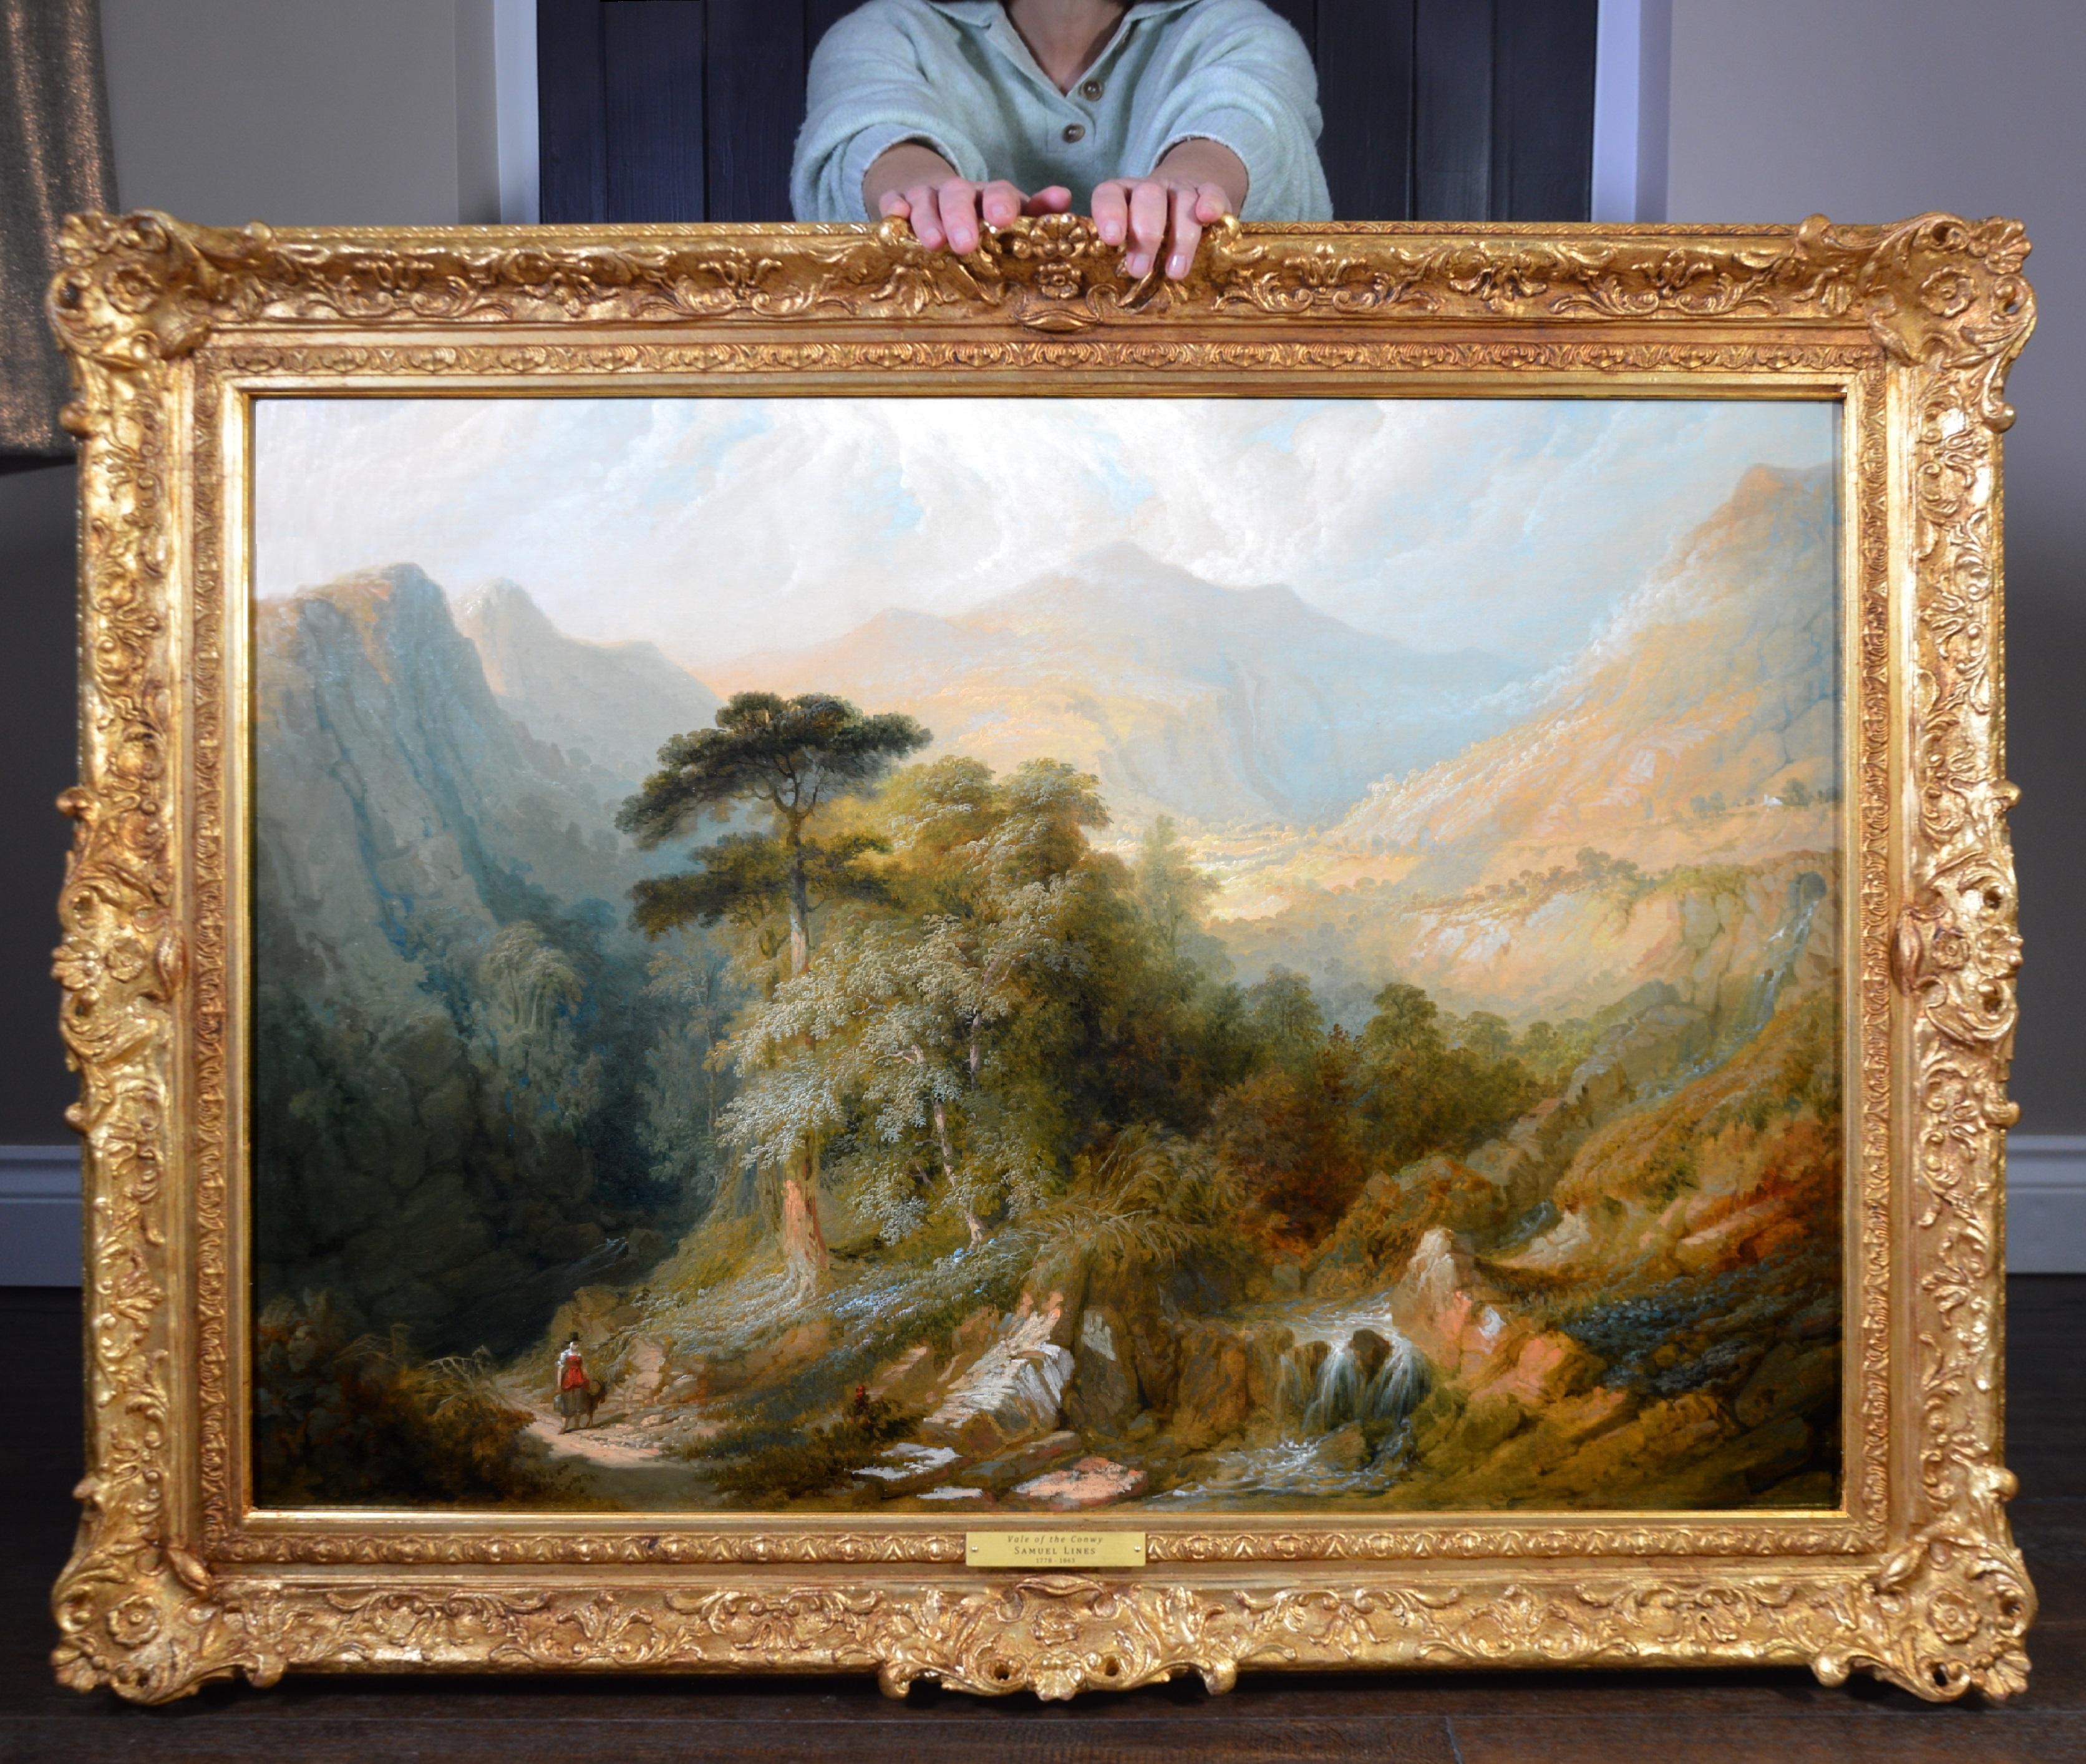 Samuel Lines Landscape Painting - Vale of the Conwy - Large 19th Century Oil Painting Welsh Mountain Landscape